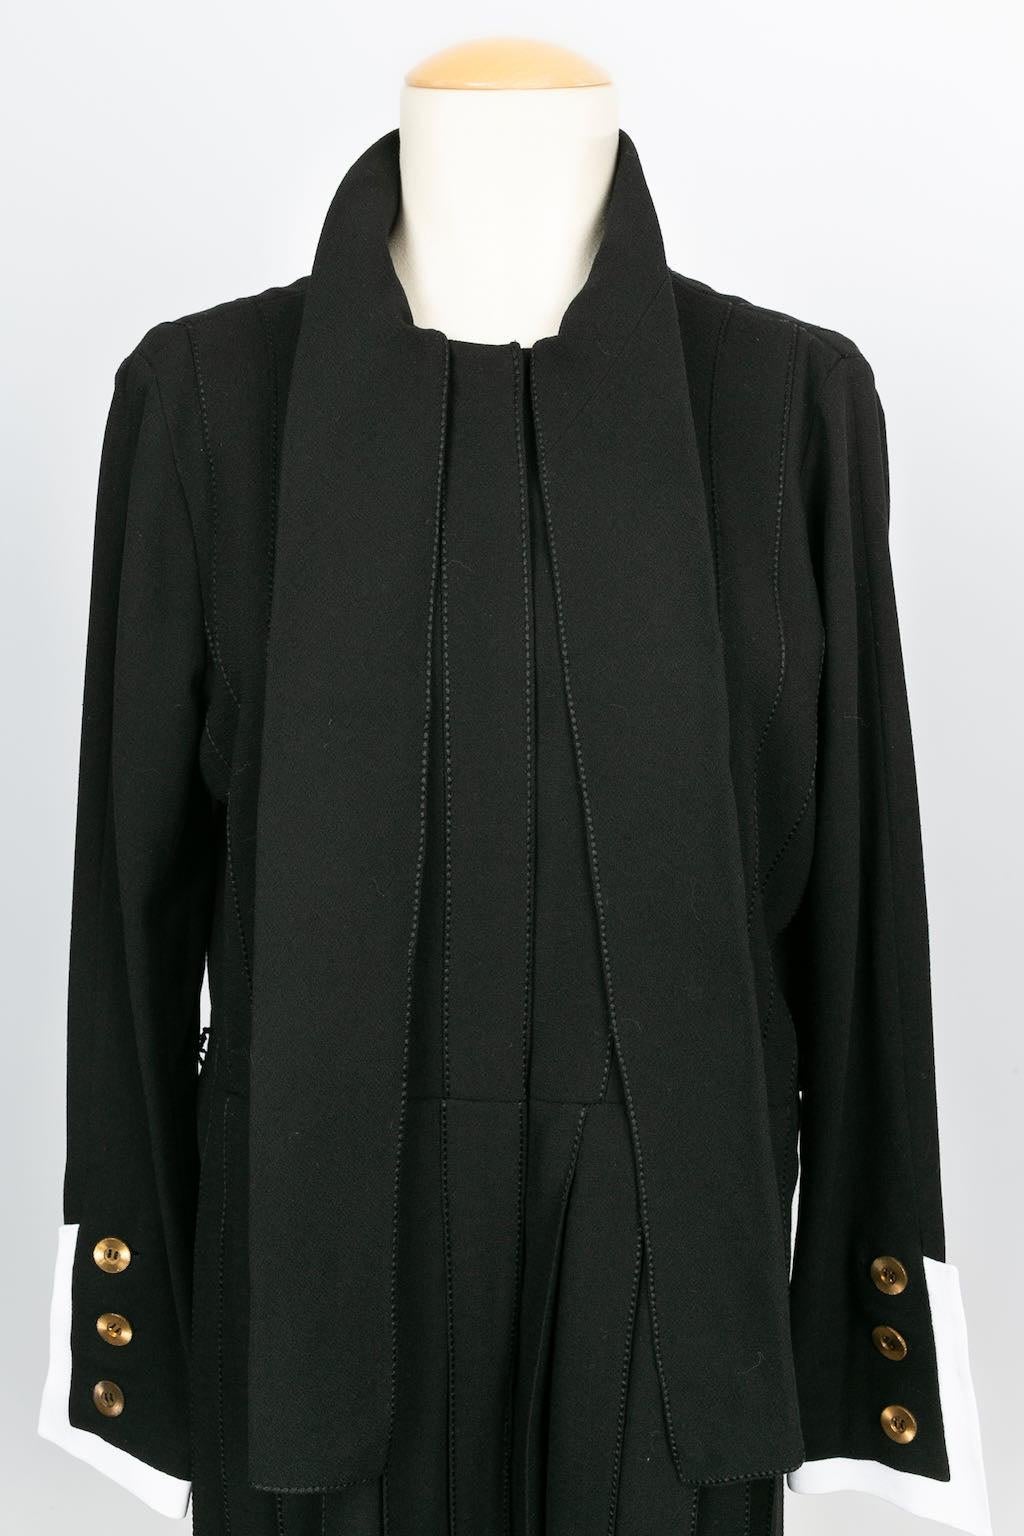 Chanel Haute Couture Black Jersey Dress For Sale 1